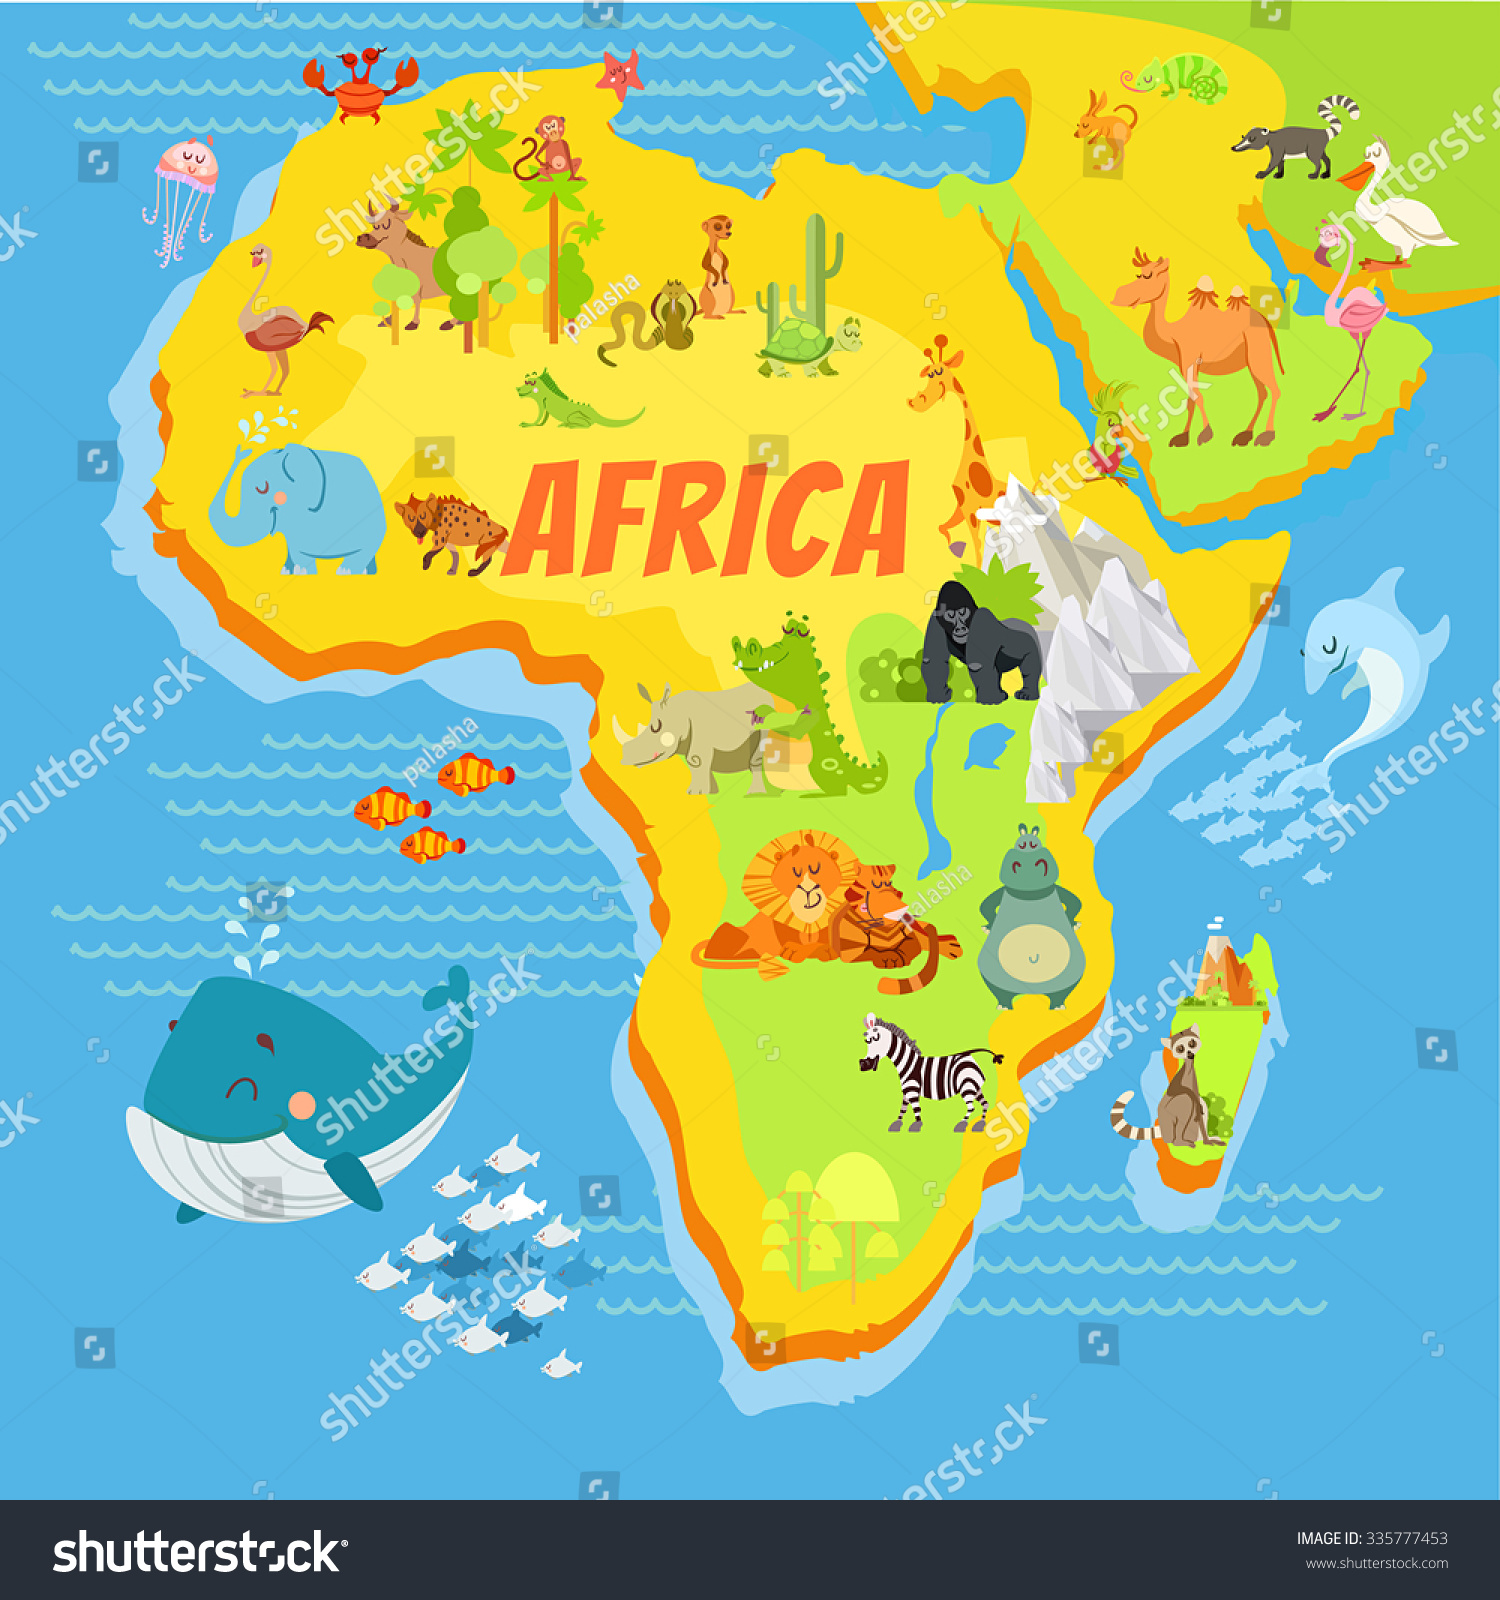 Africa Map Map Of Africa History And Popular Attraction In Africa